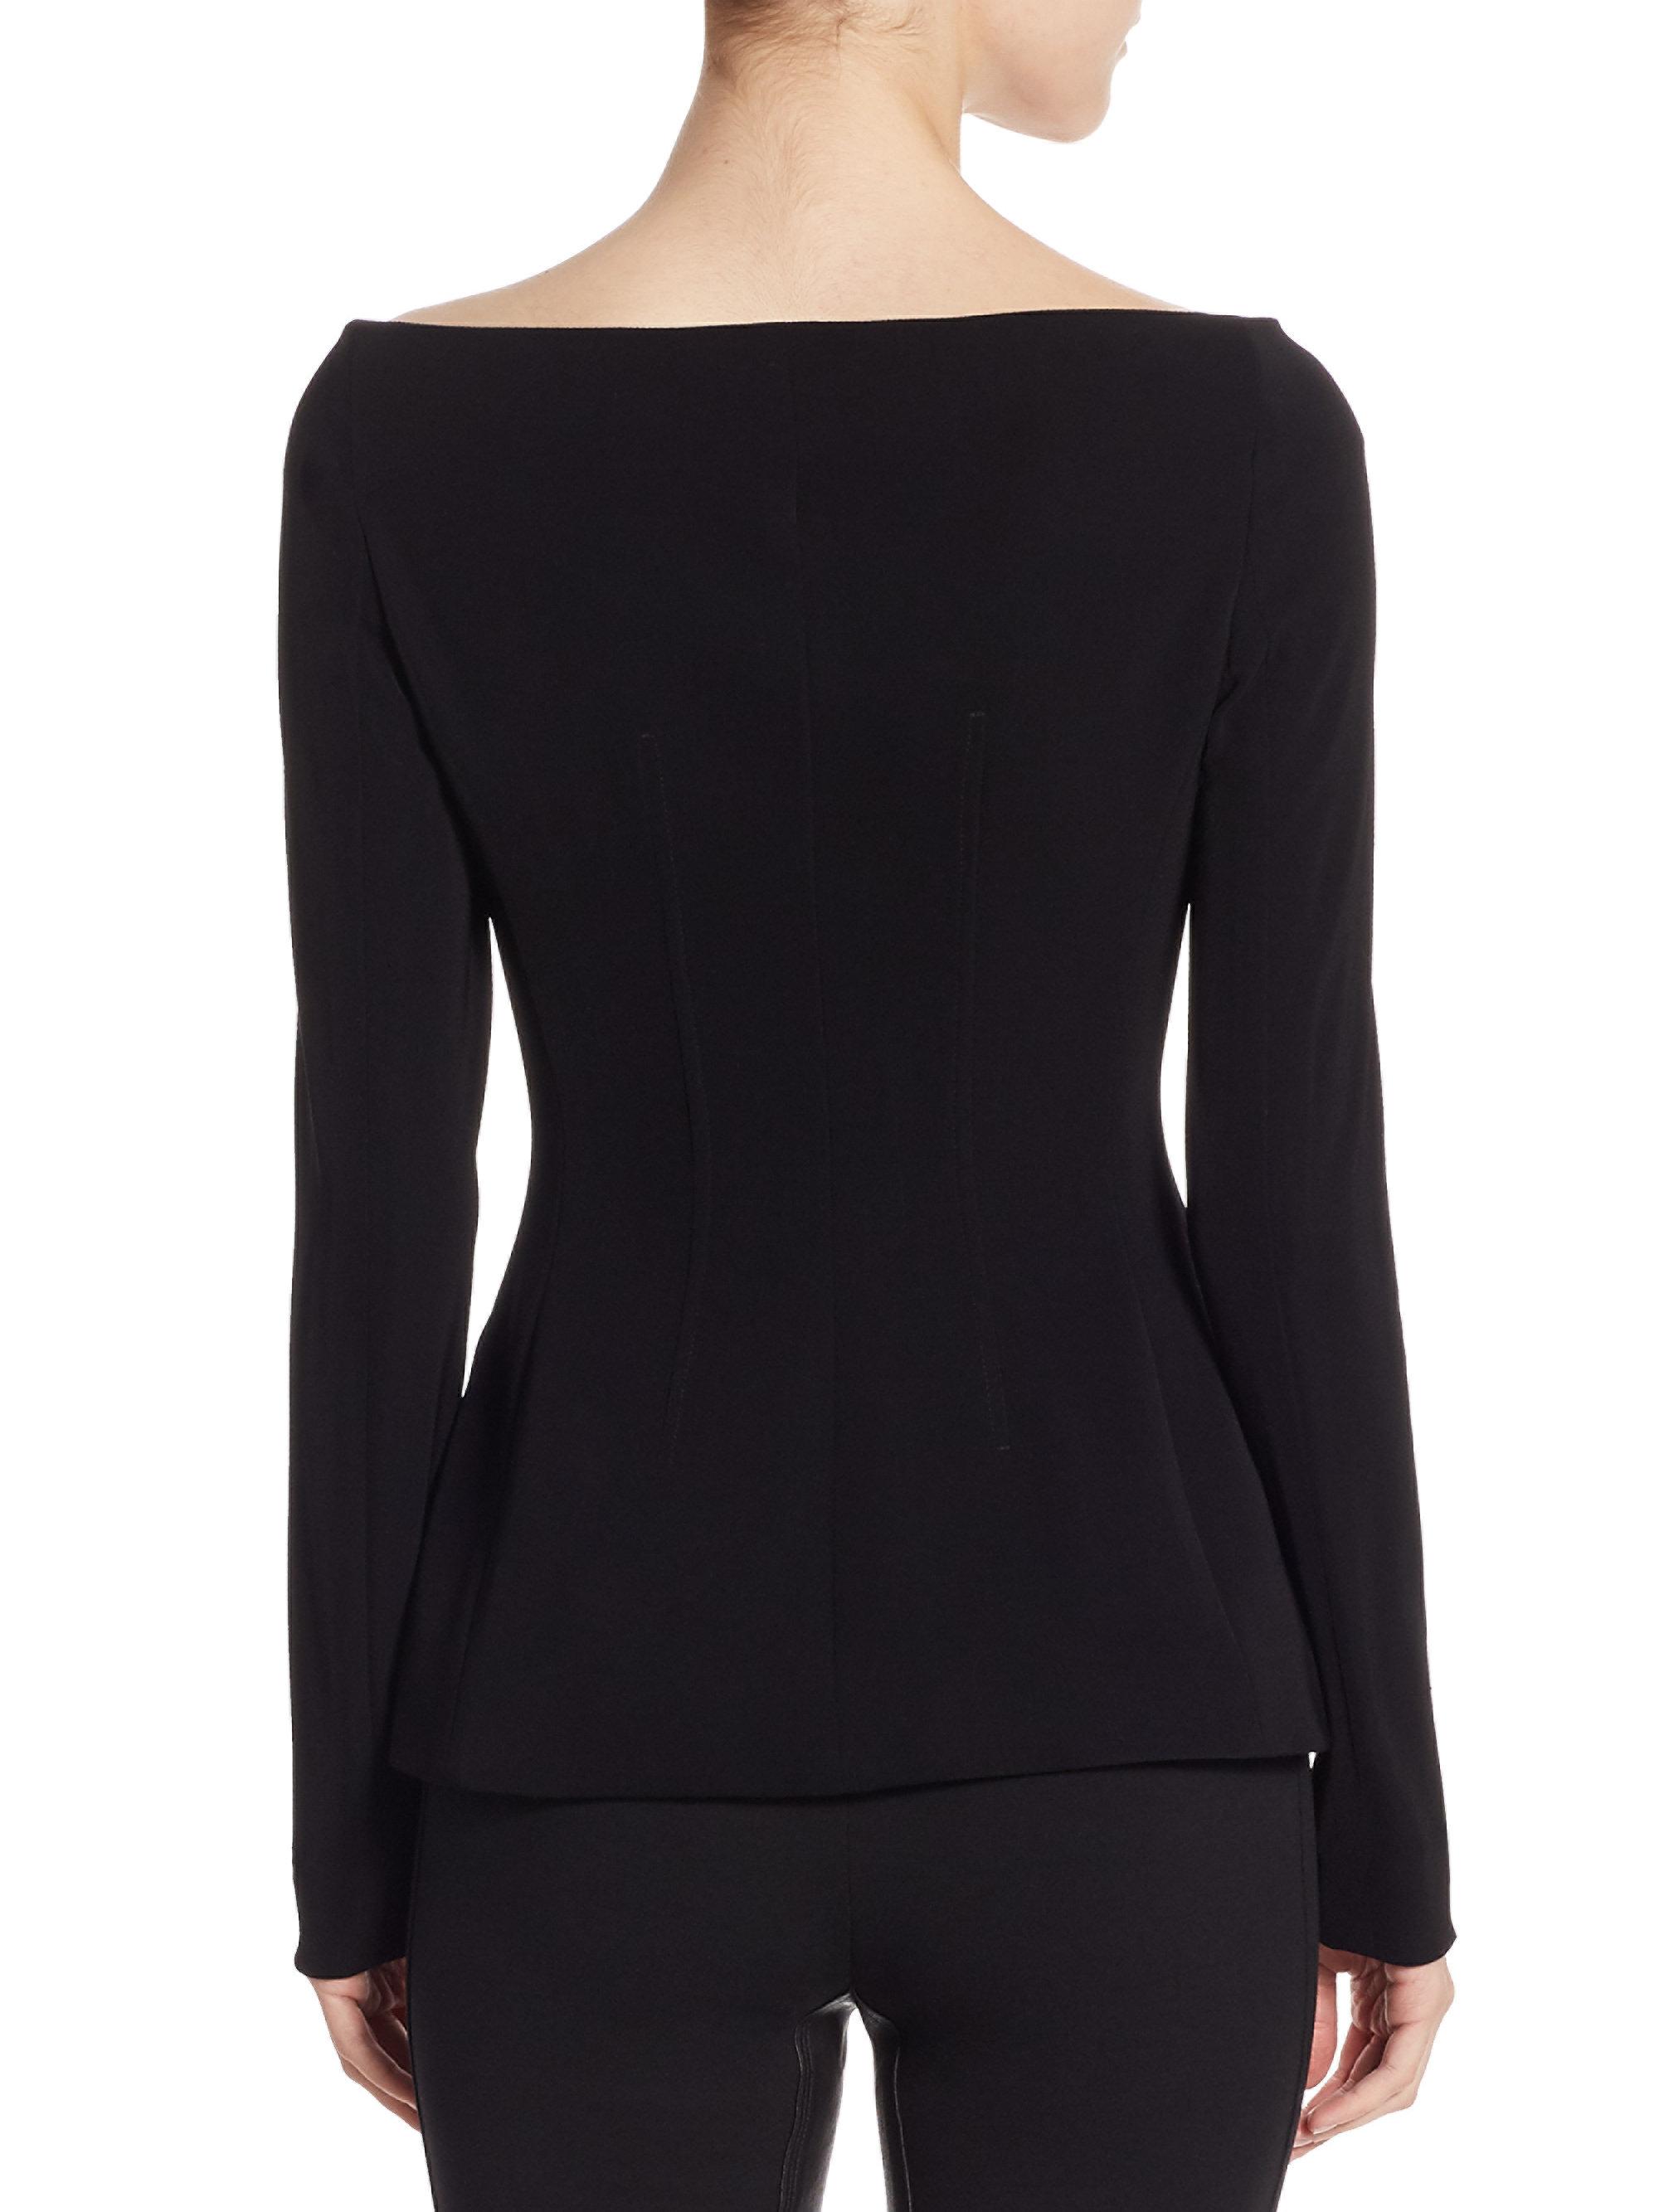 Theory Synthetic Zip Off Shoulder Jacket in Black - Lyst